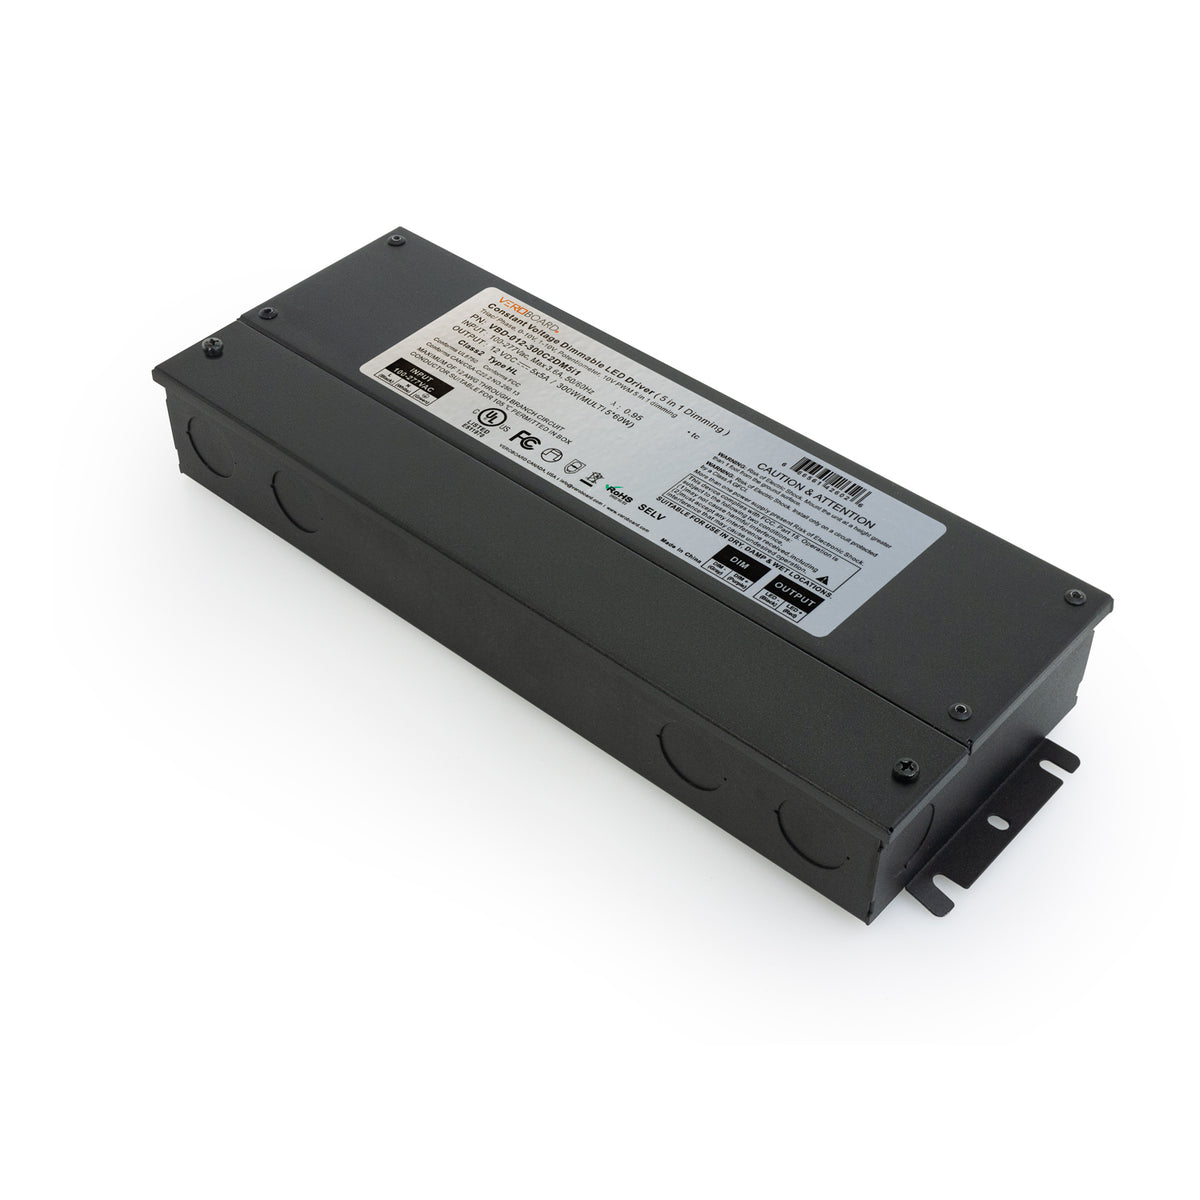 VBD-012-300C2DM5i1 Constant Voltage Dimmable Driver (5 in 1), Veroboard